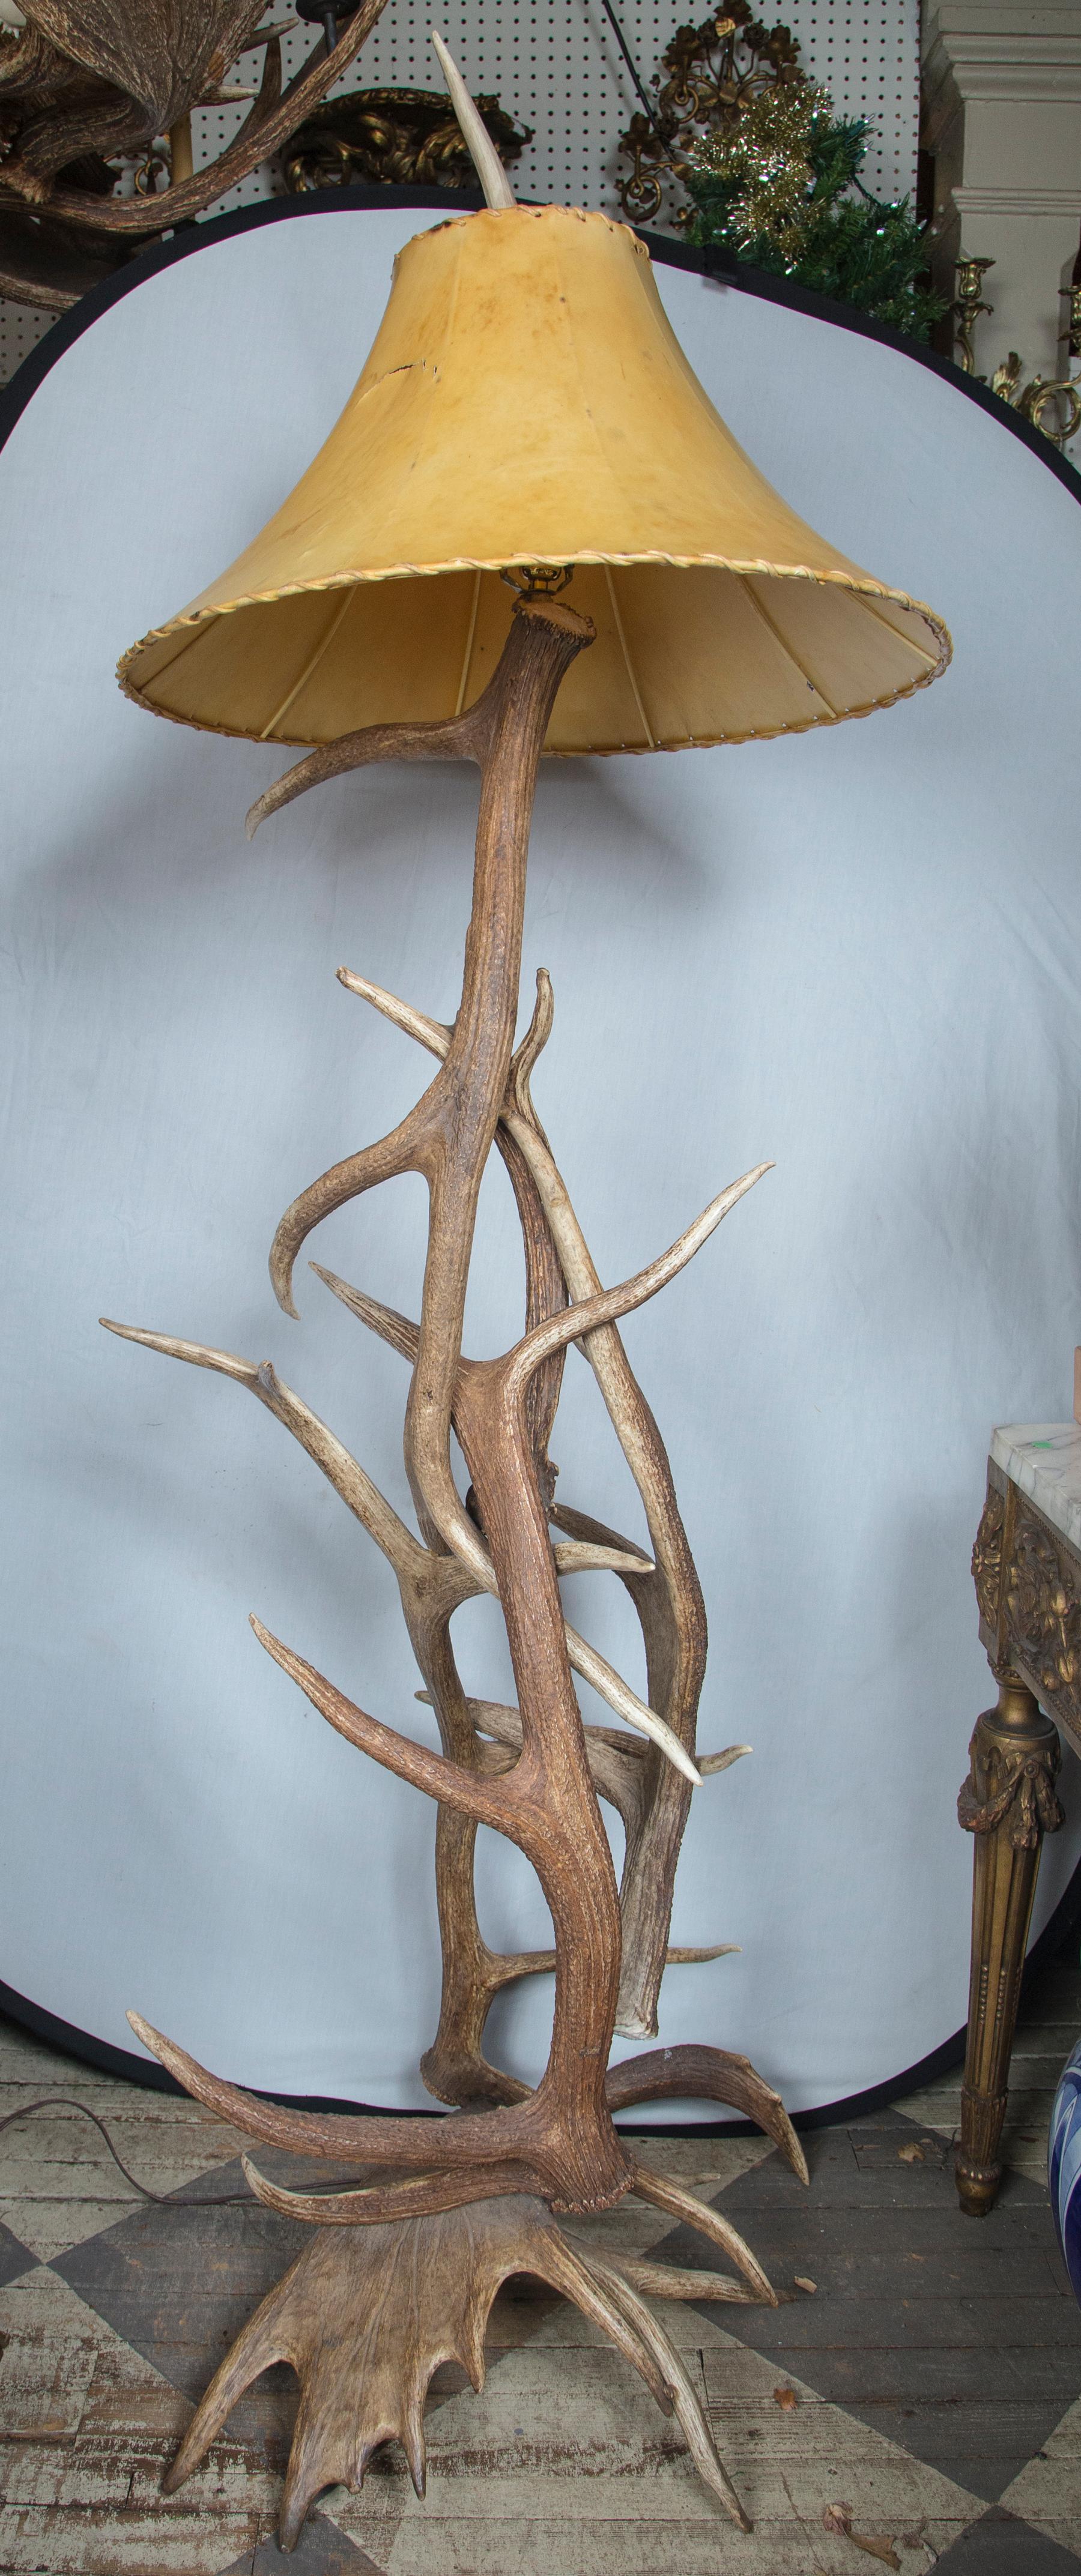 Made of intertwined elk and moose antler. Complete with a parchment (?) shade. The shade does have a slit in it. The height of 80 includes to the tip of the finial.